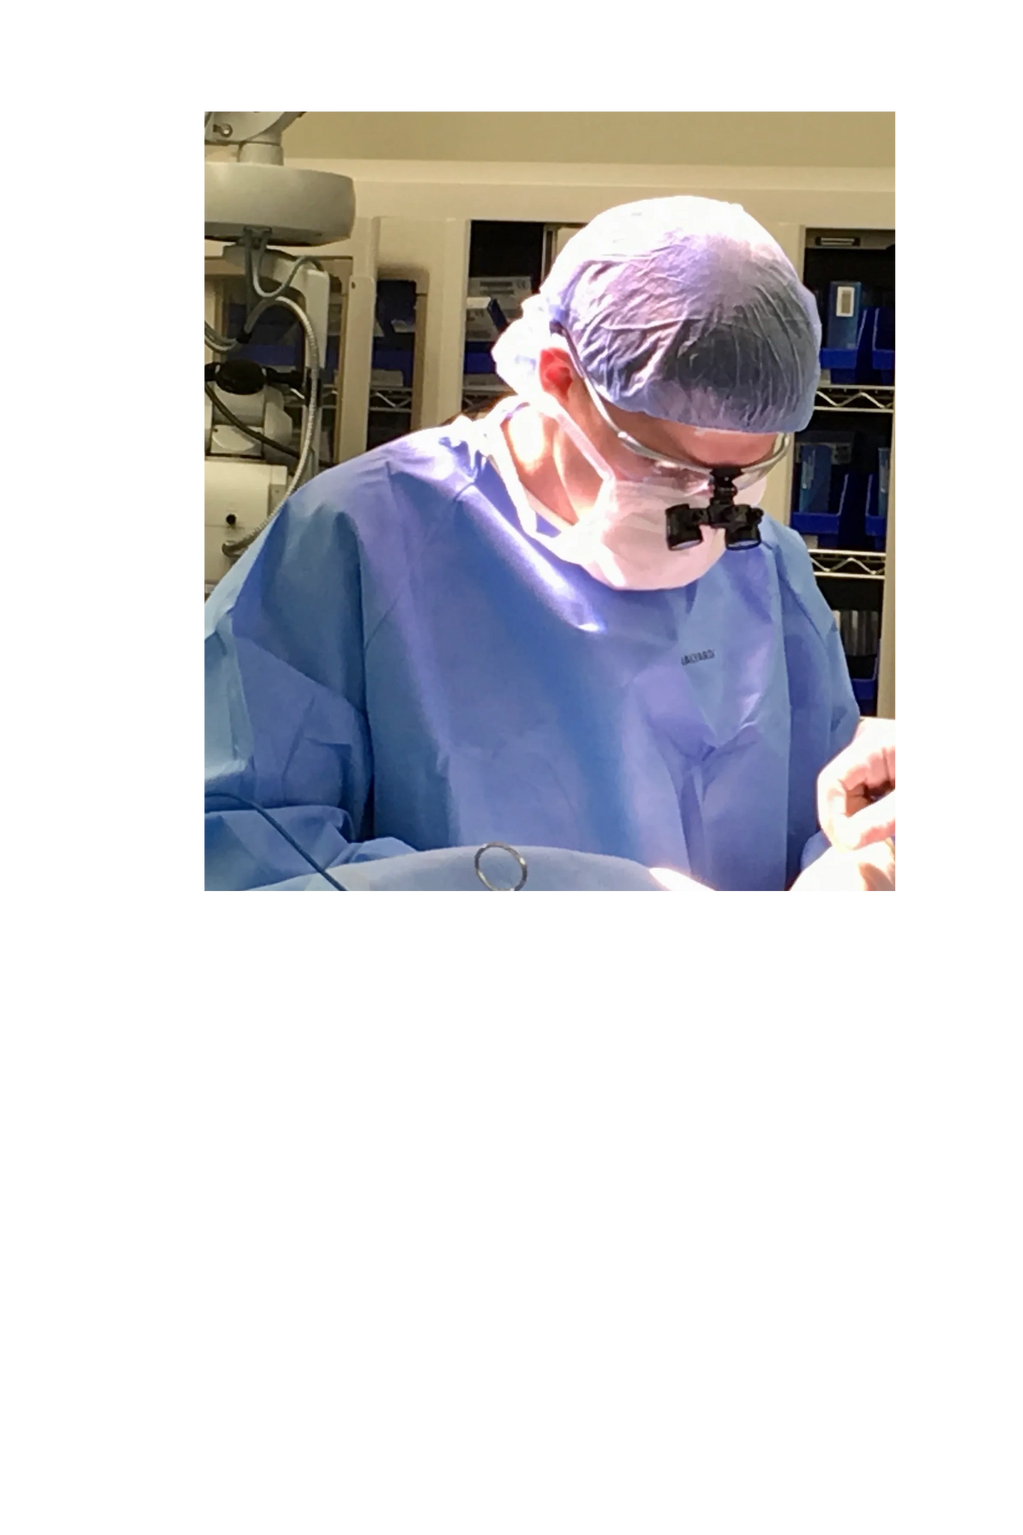 Dr. McConnell performing blepharoplasty surgery.